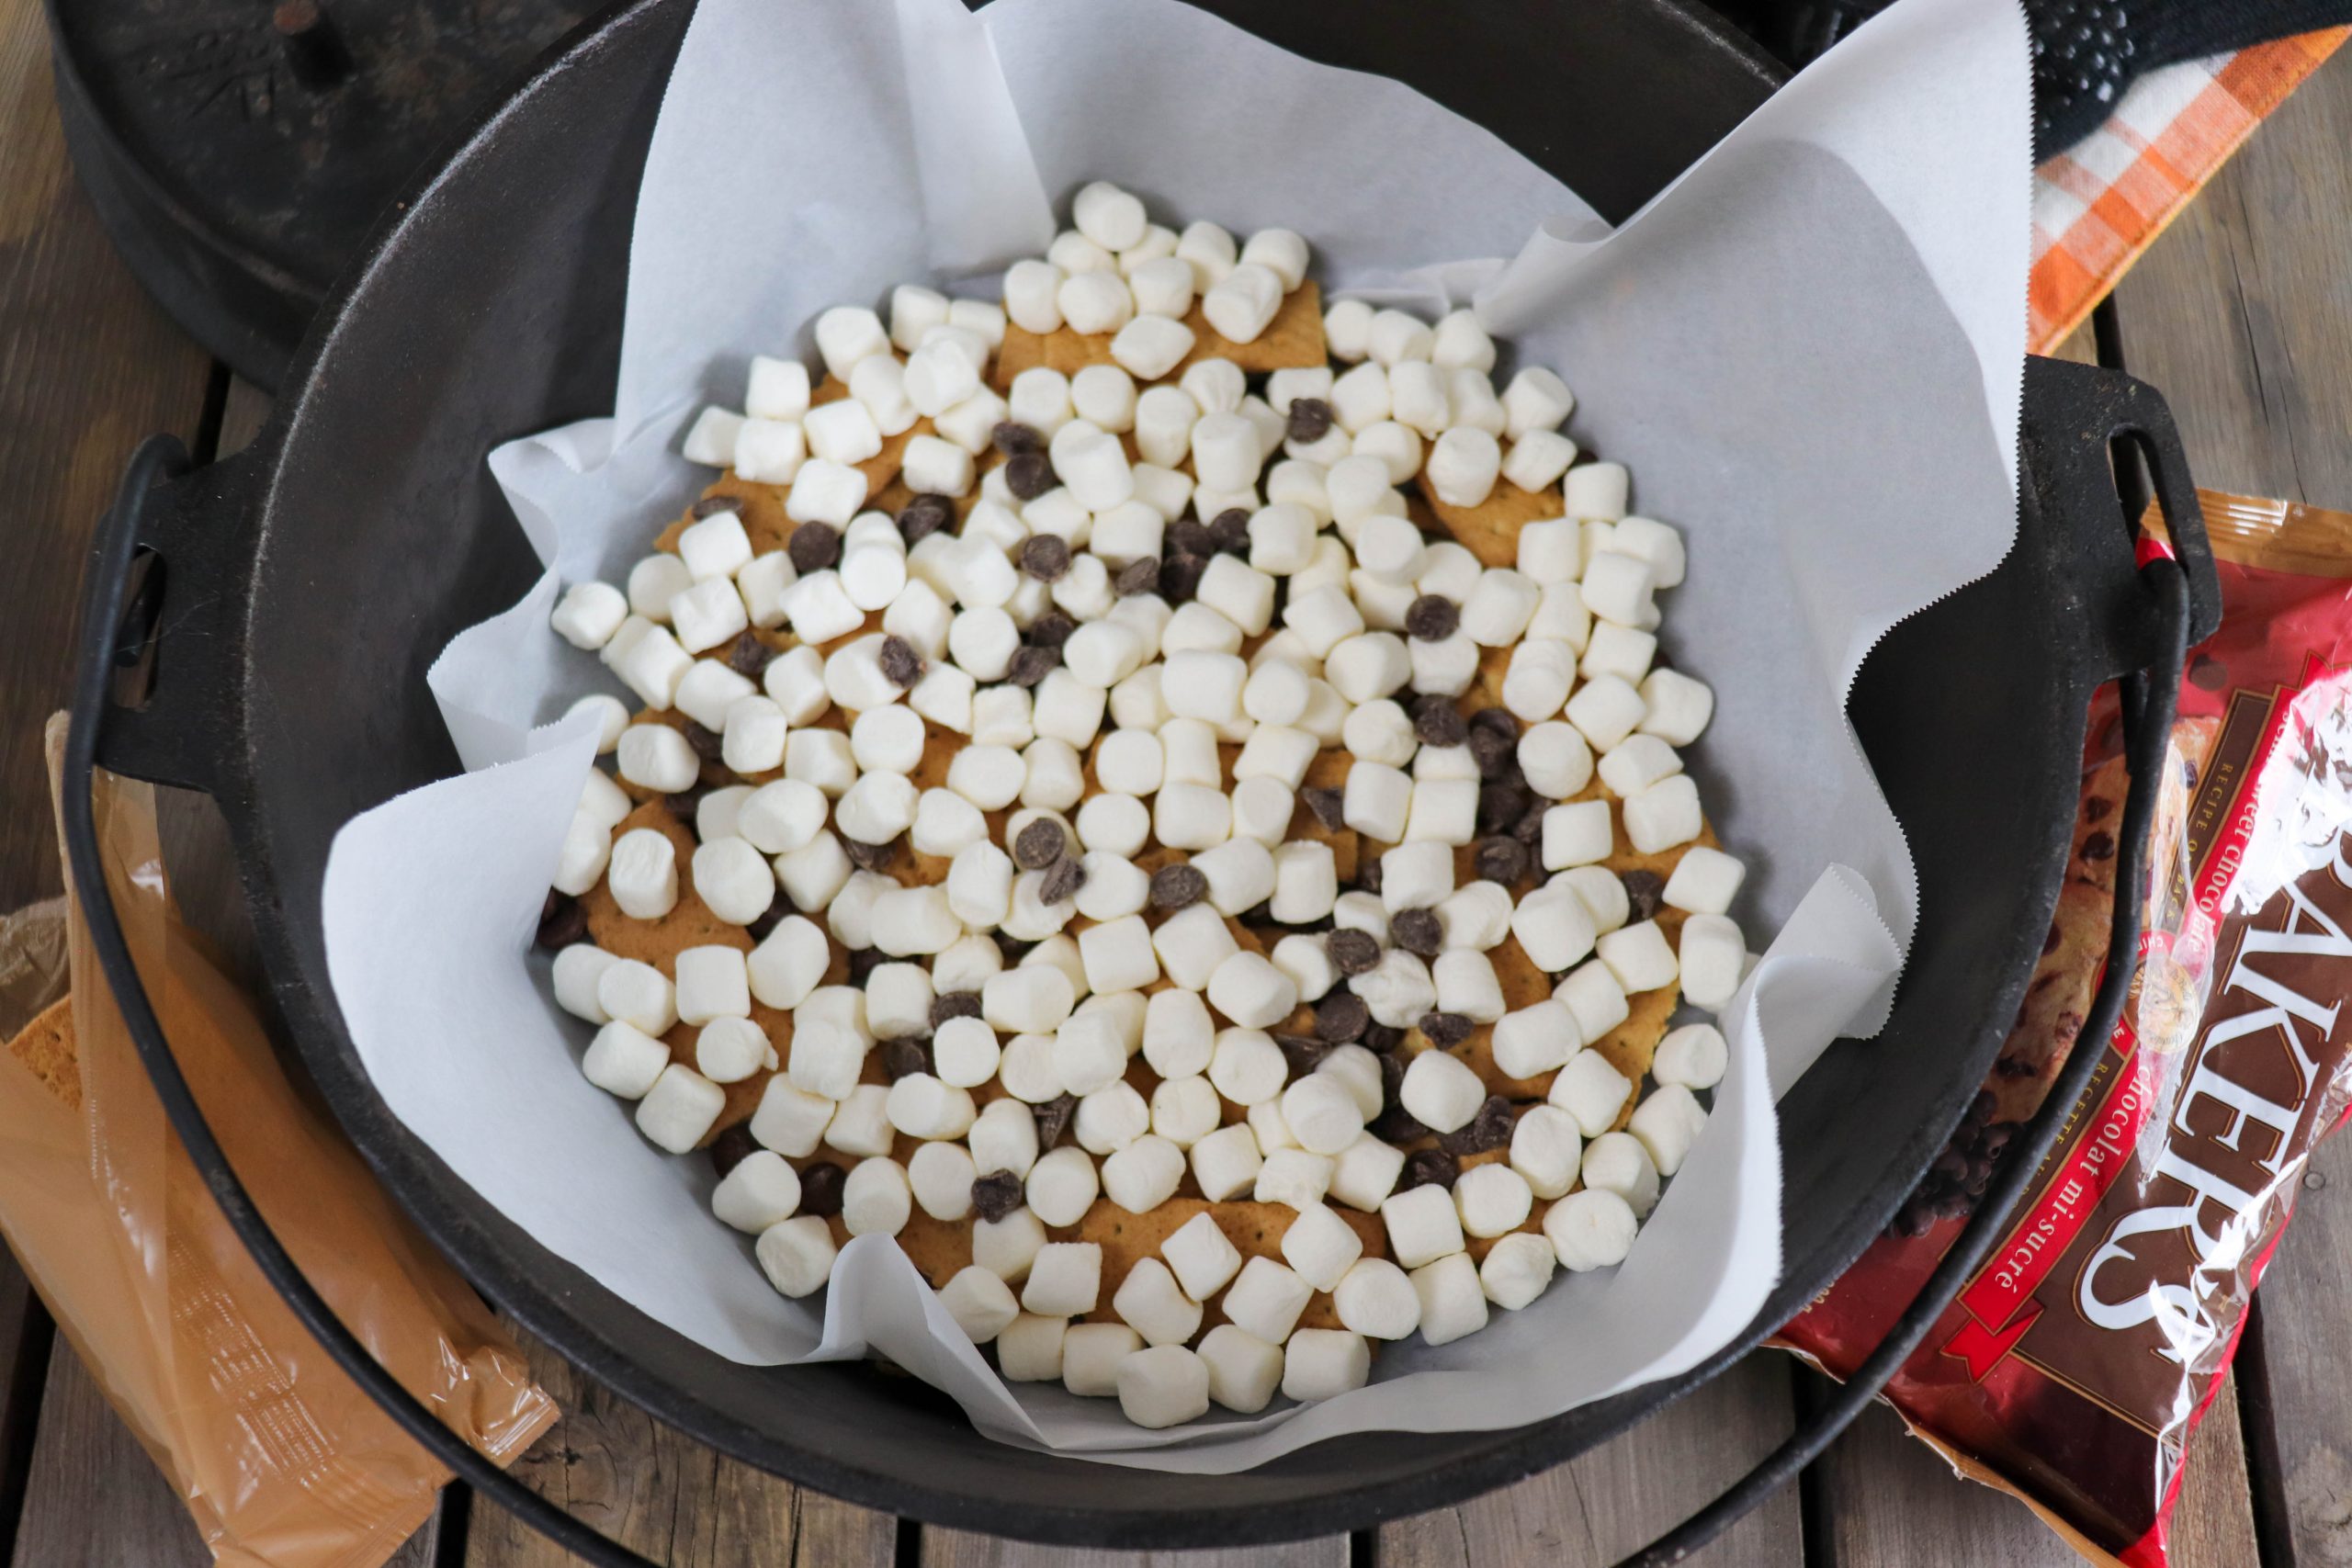 https://campfirefoodie.com/wp-content/uploads/2021/02/Dutch-Oven-Smores-Recipe-5-scaled.jpg